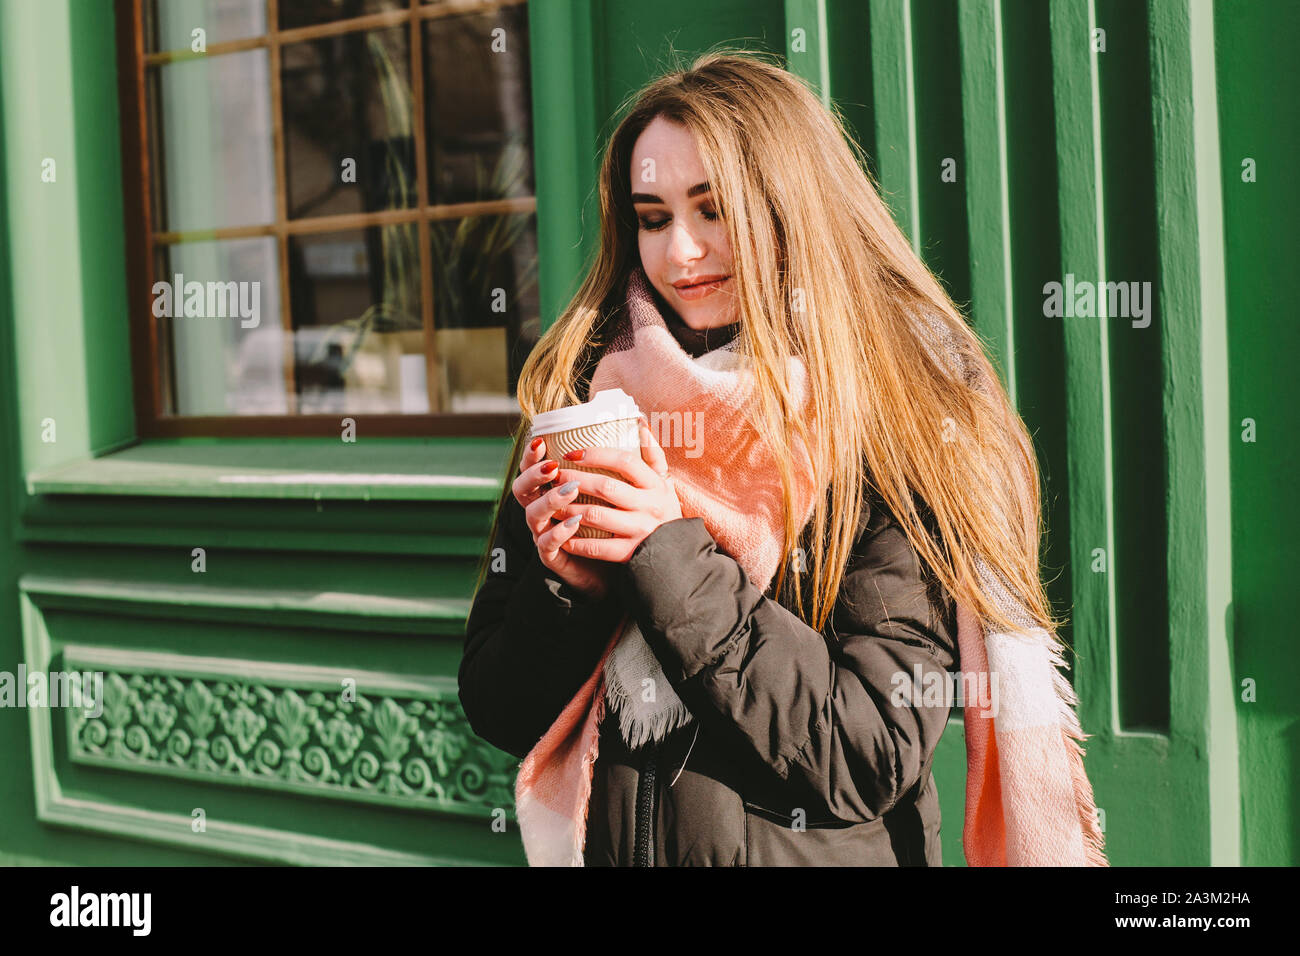 Happy woman with disposable cup in warm clothing standing beside green building in city street during winter Stock Photo